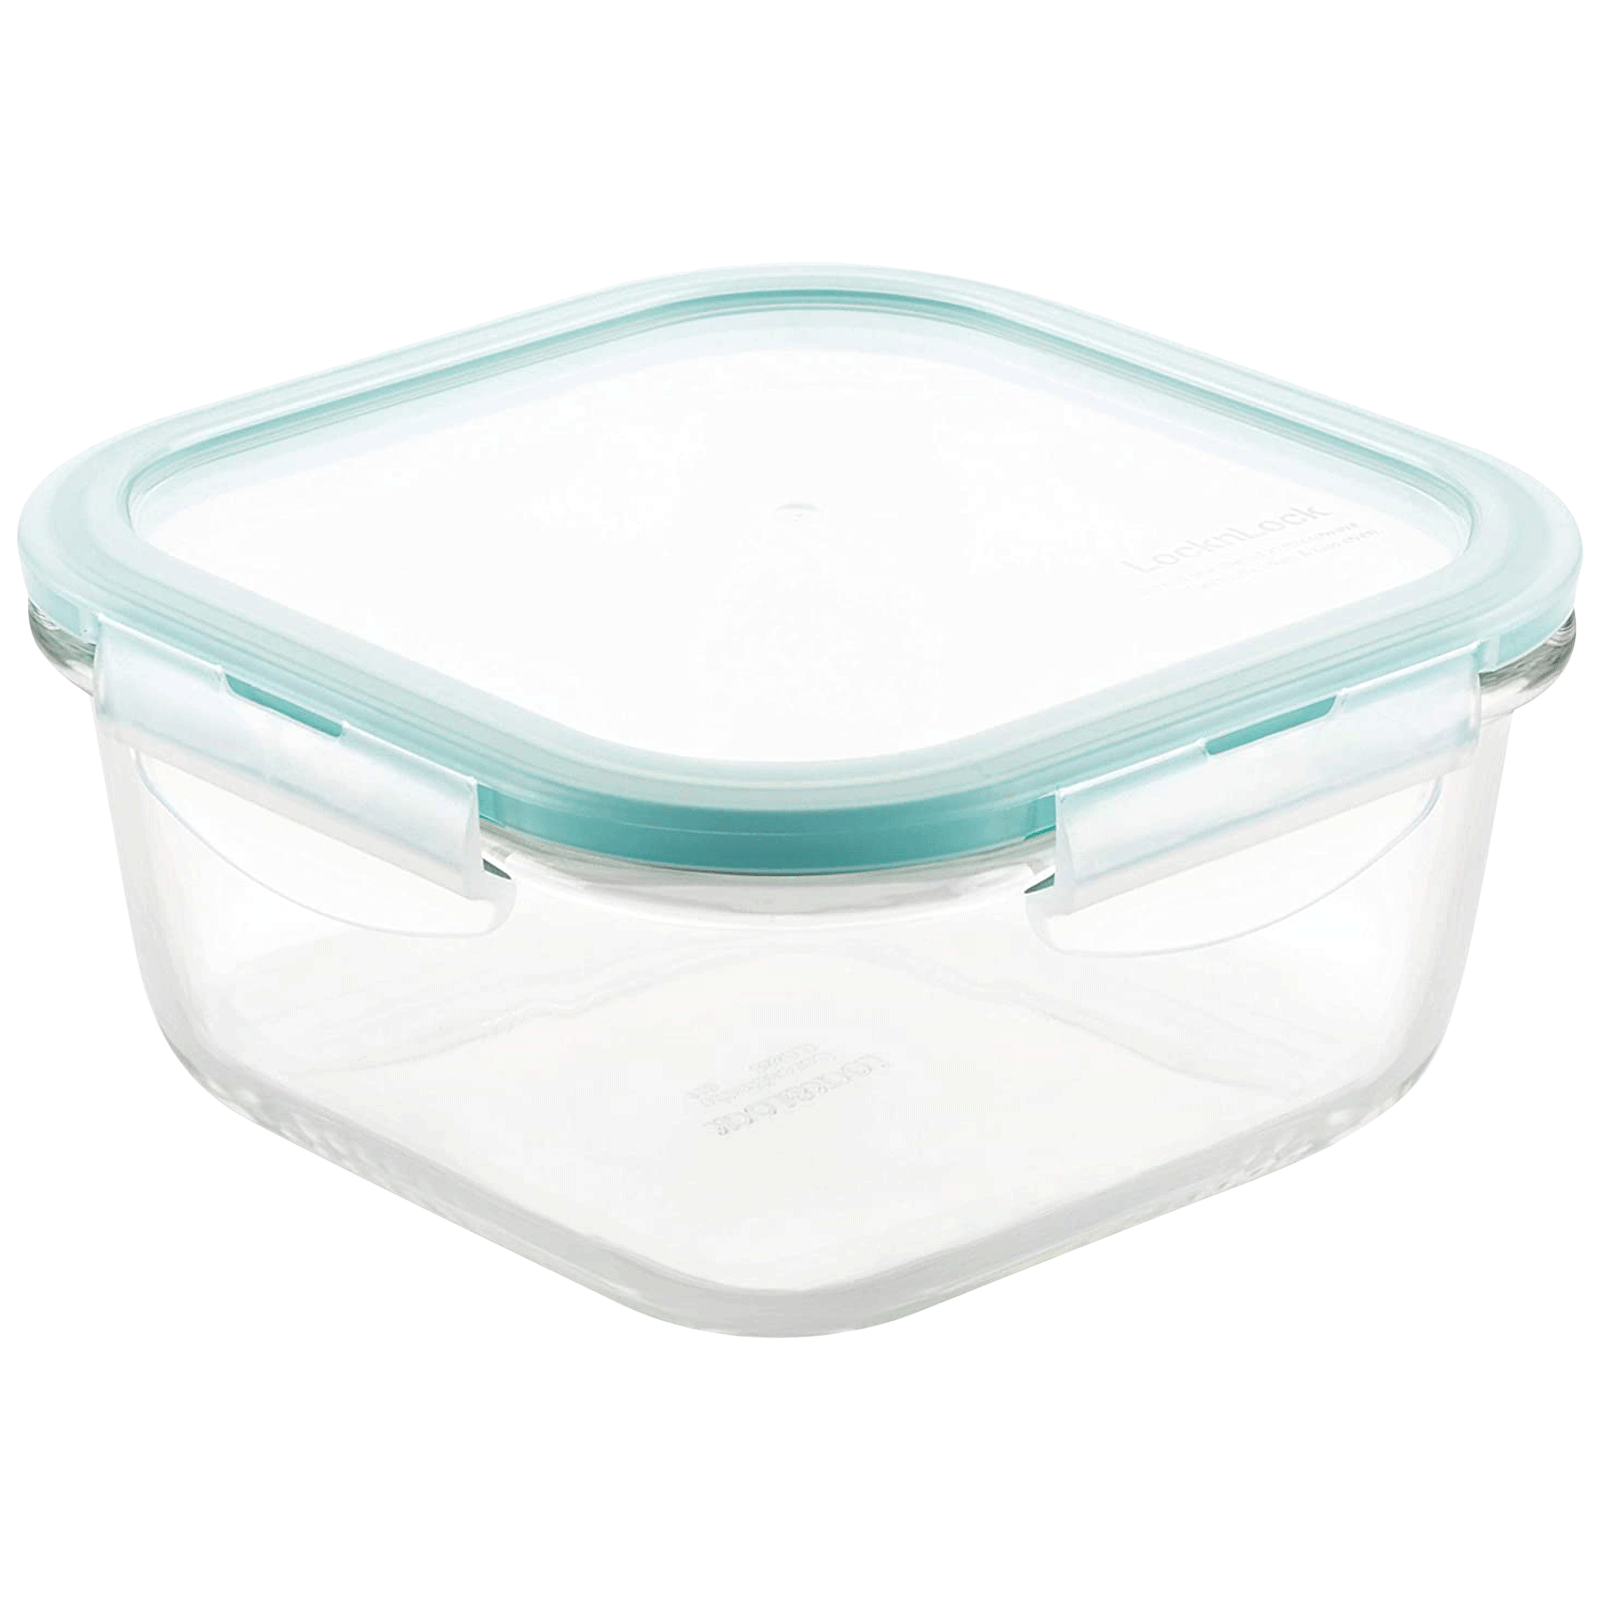 Lock & Lock Ovenglass 840 ml Square Glass Storage Container (Heat Resistant, LLG225, Transparent)